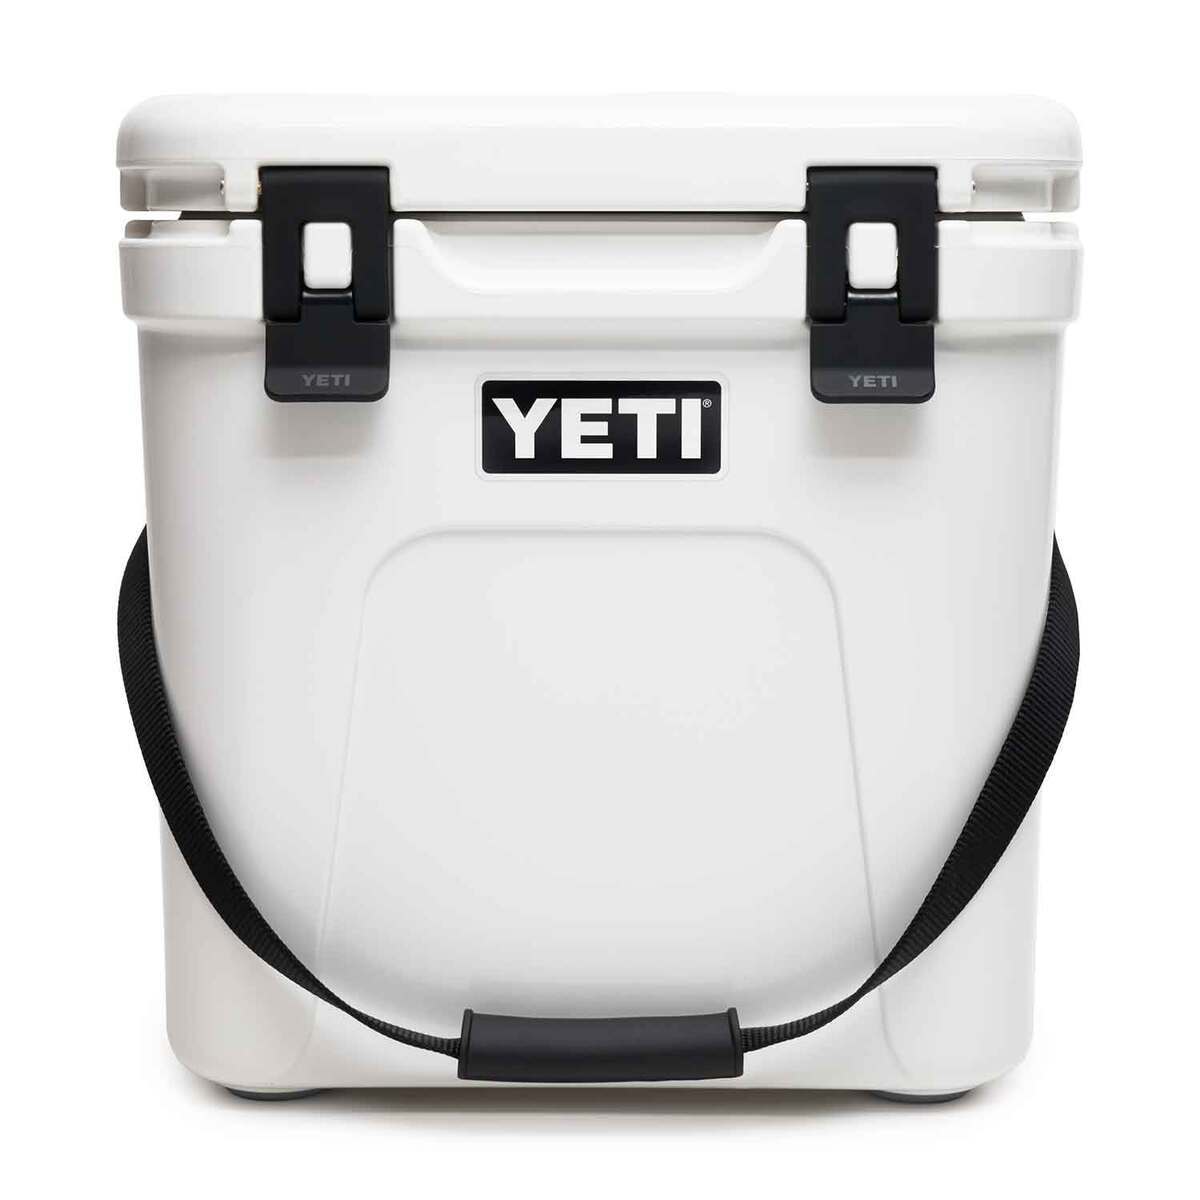 THE LOADER Lite -PVC- Loading Stick For Your YETI M20 Soft Cooler